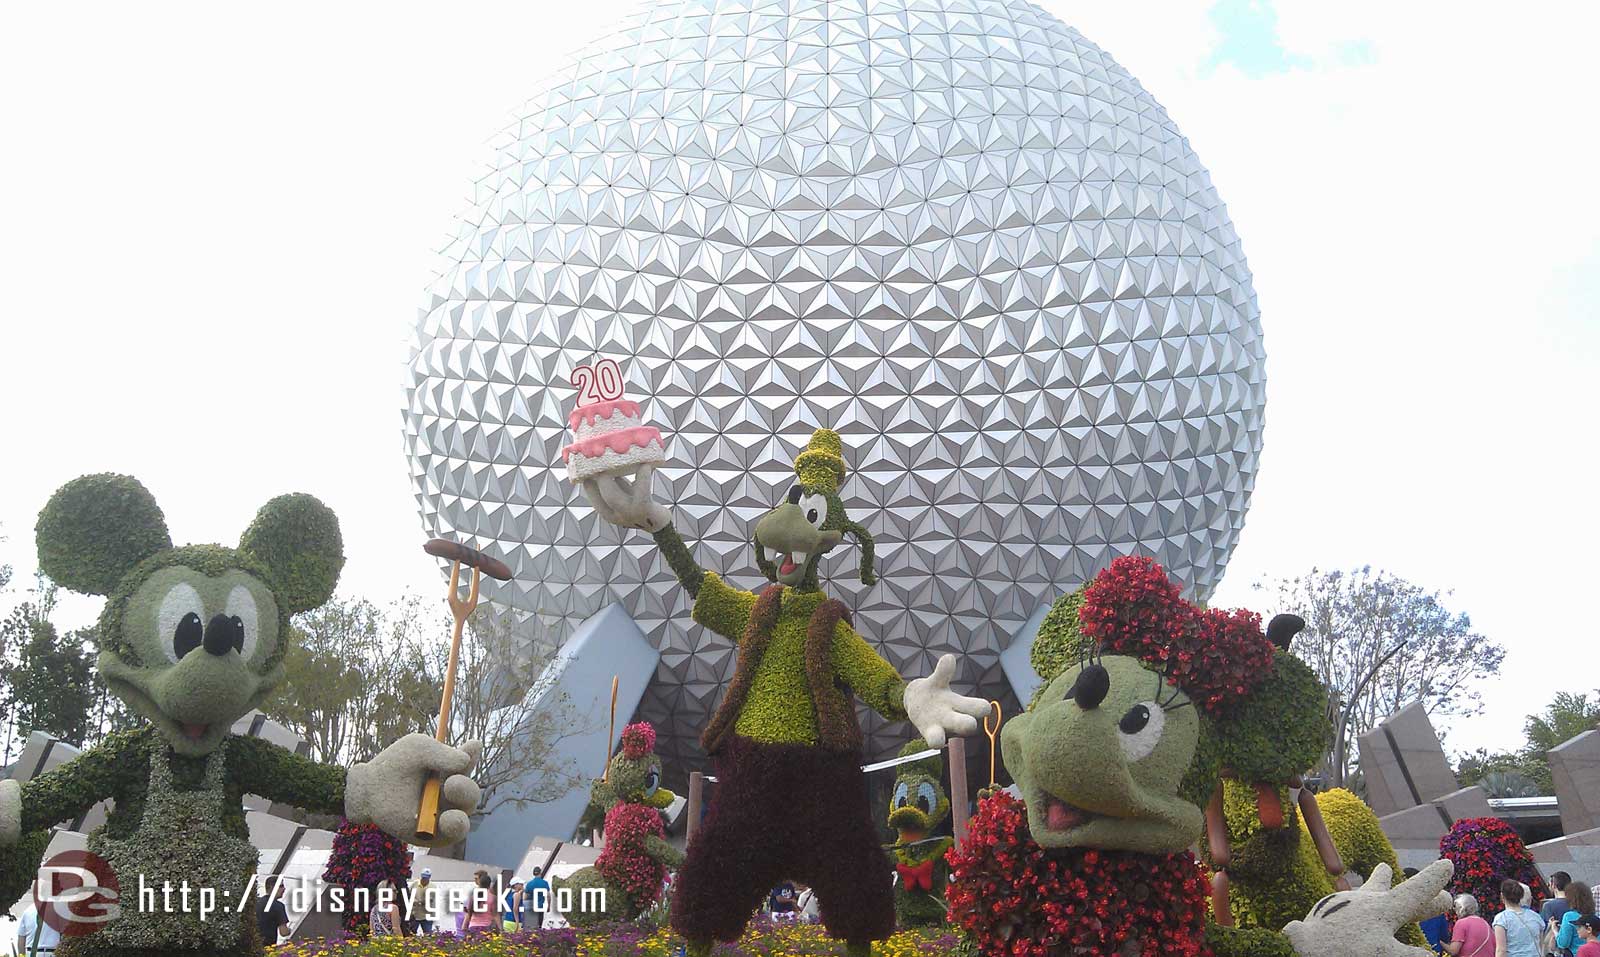 One last look at the Epcot entrance topiary as we leave the park.